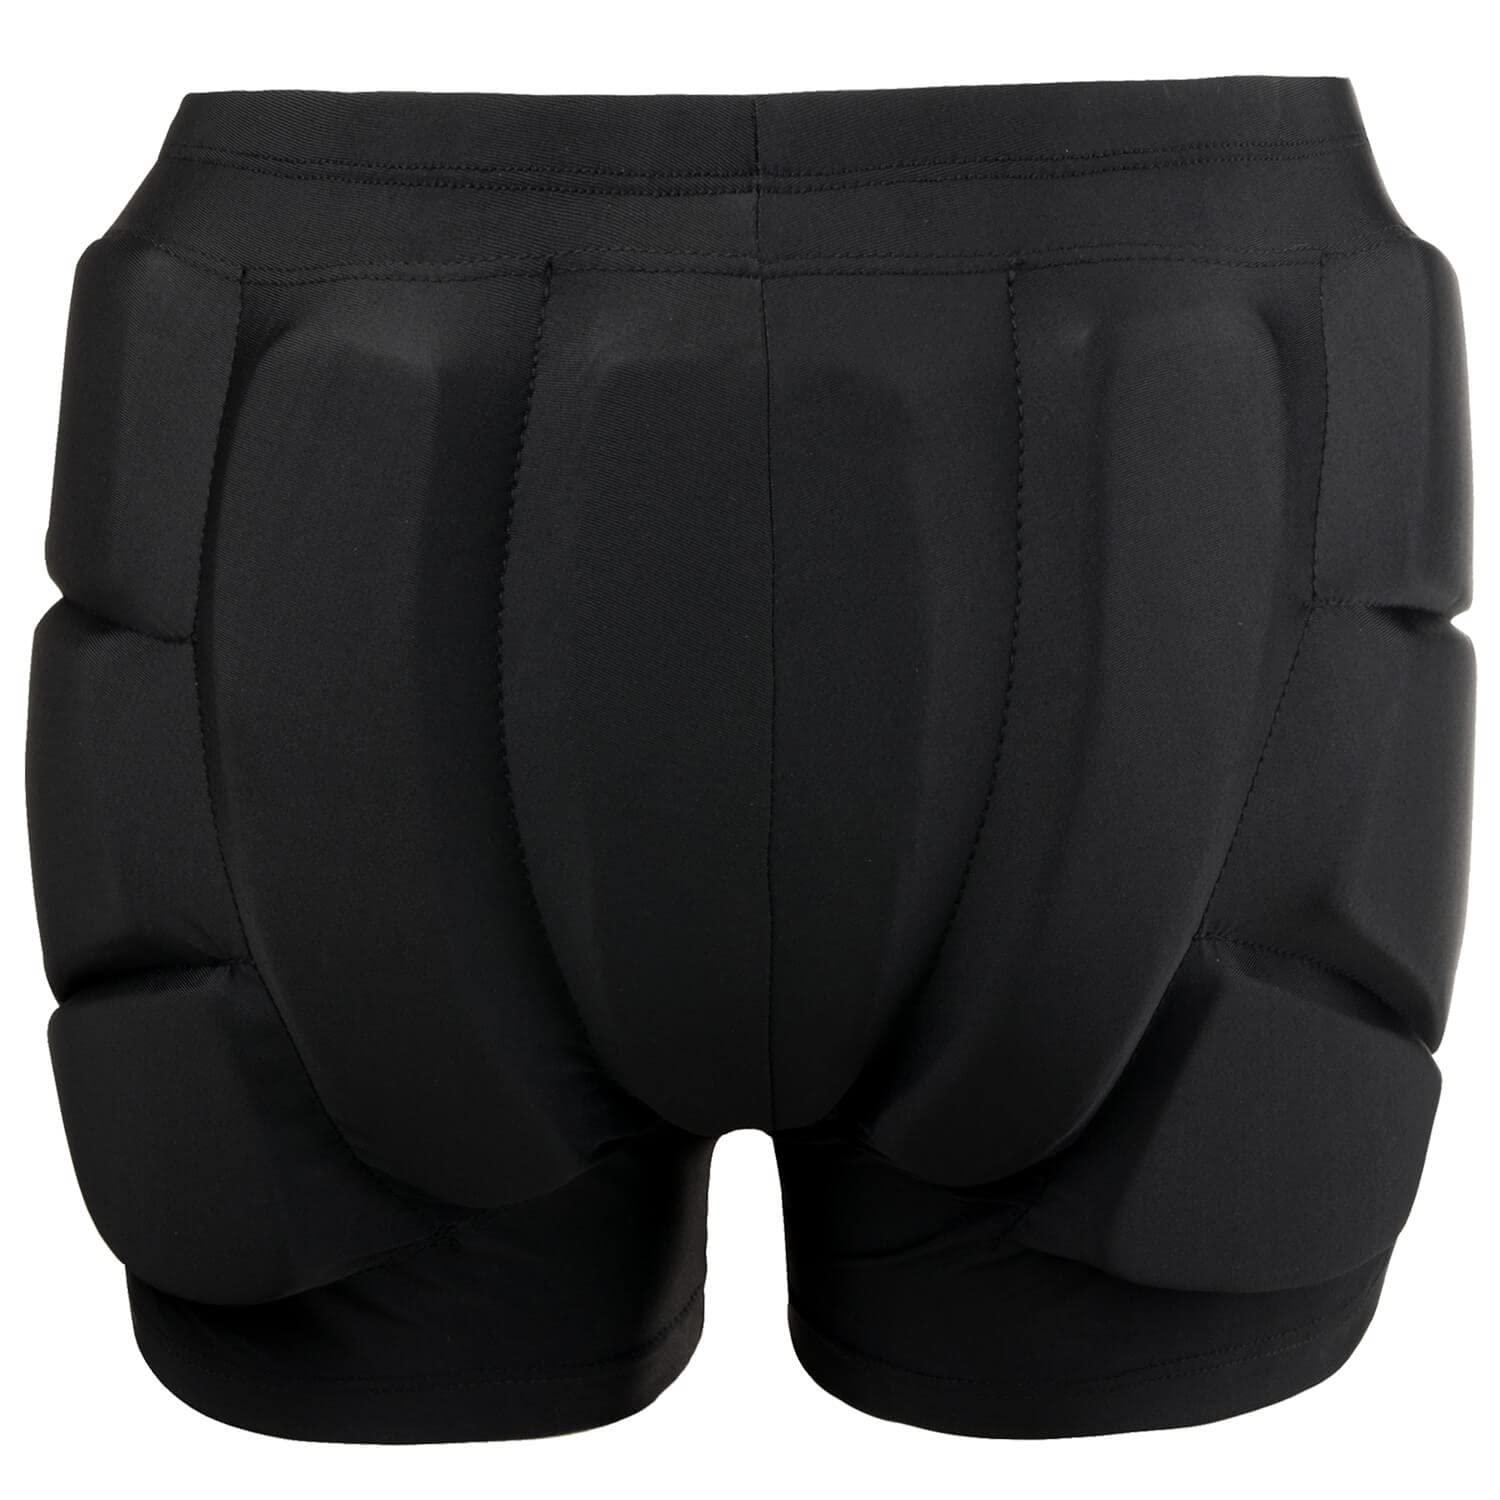 Protective Padded Shorts For Kids - 3d Hip, Butt, And Tailbone